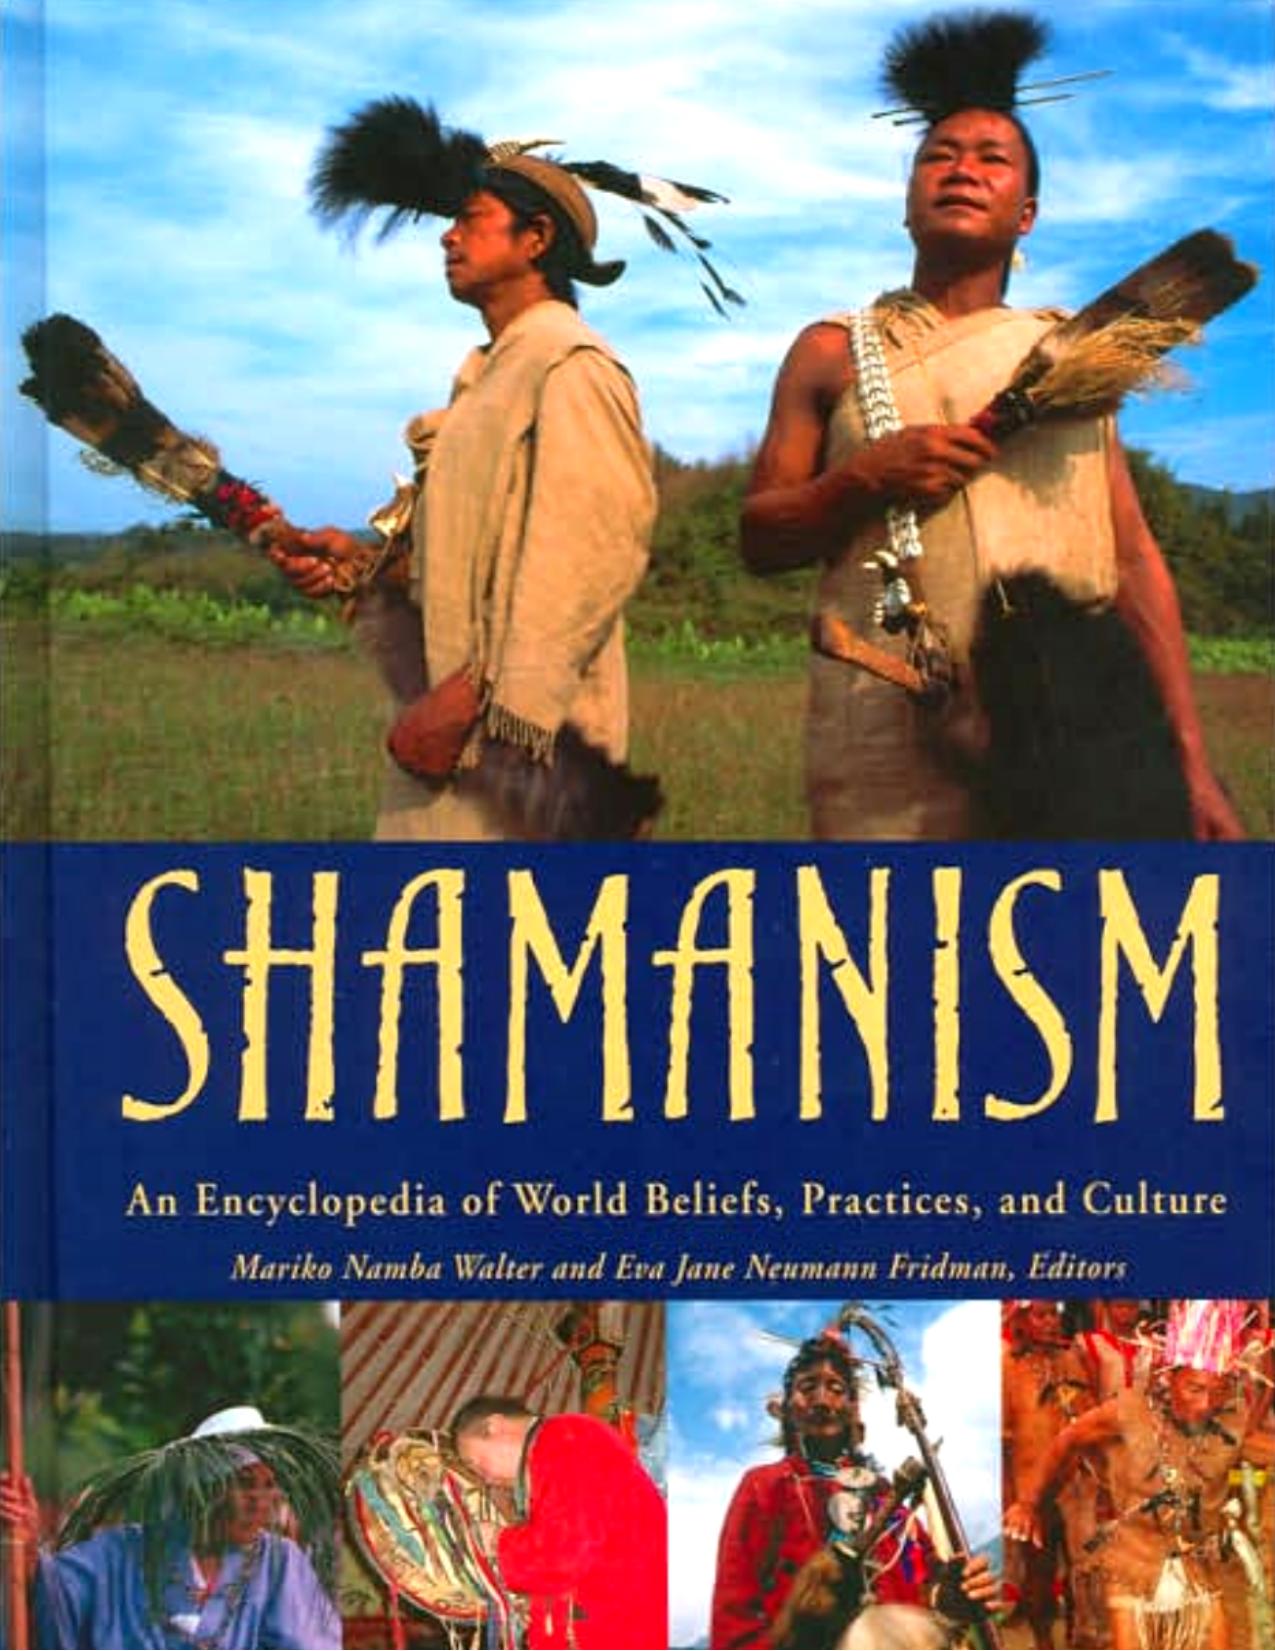 Shamanism: An Encyclopedia of World Beliefs, Practices, and Culture